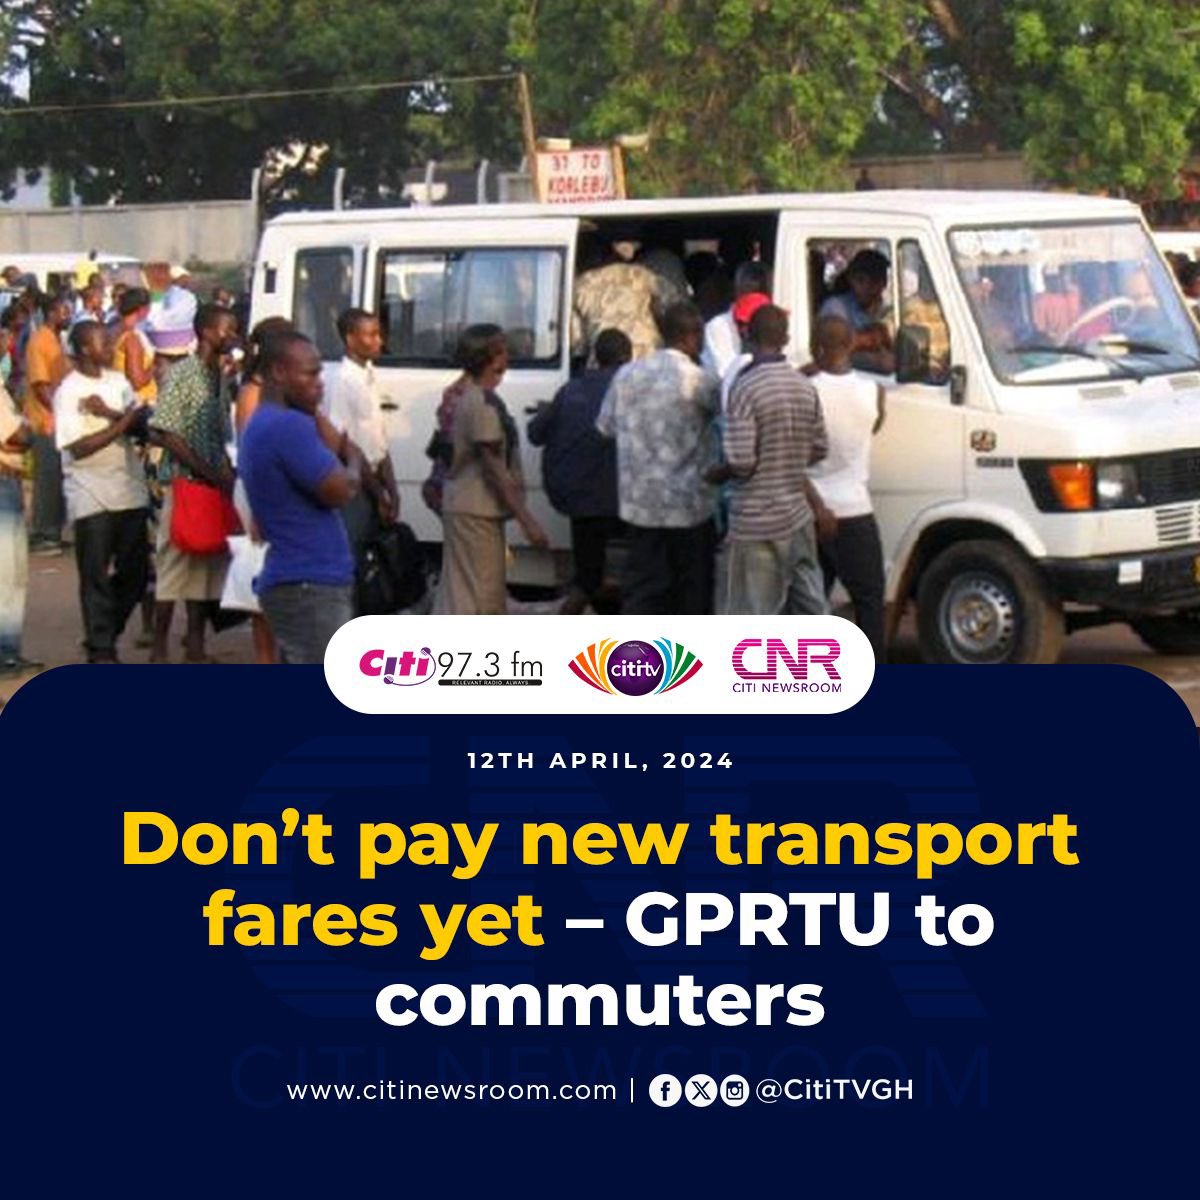 Don’t pay new transport fares yet – GPRTU to commuters

| Read more here: citinewsroom.com/2024/04/dont-p…. #CitiNewsroom